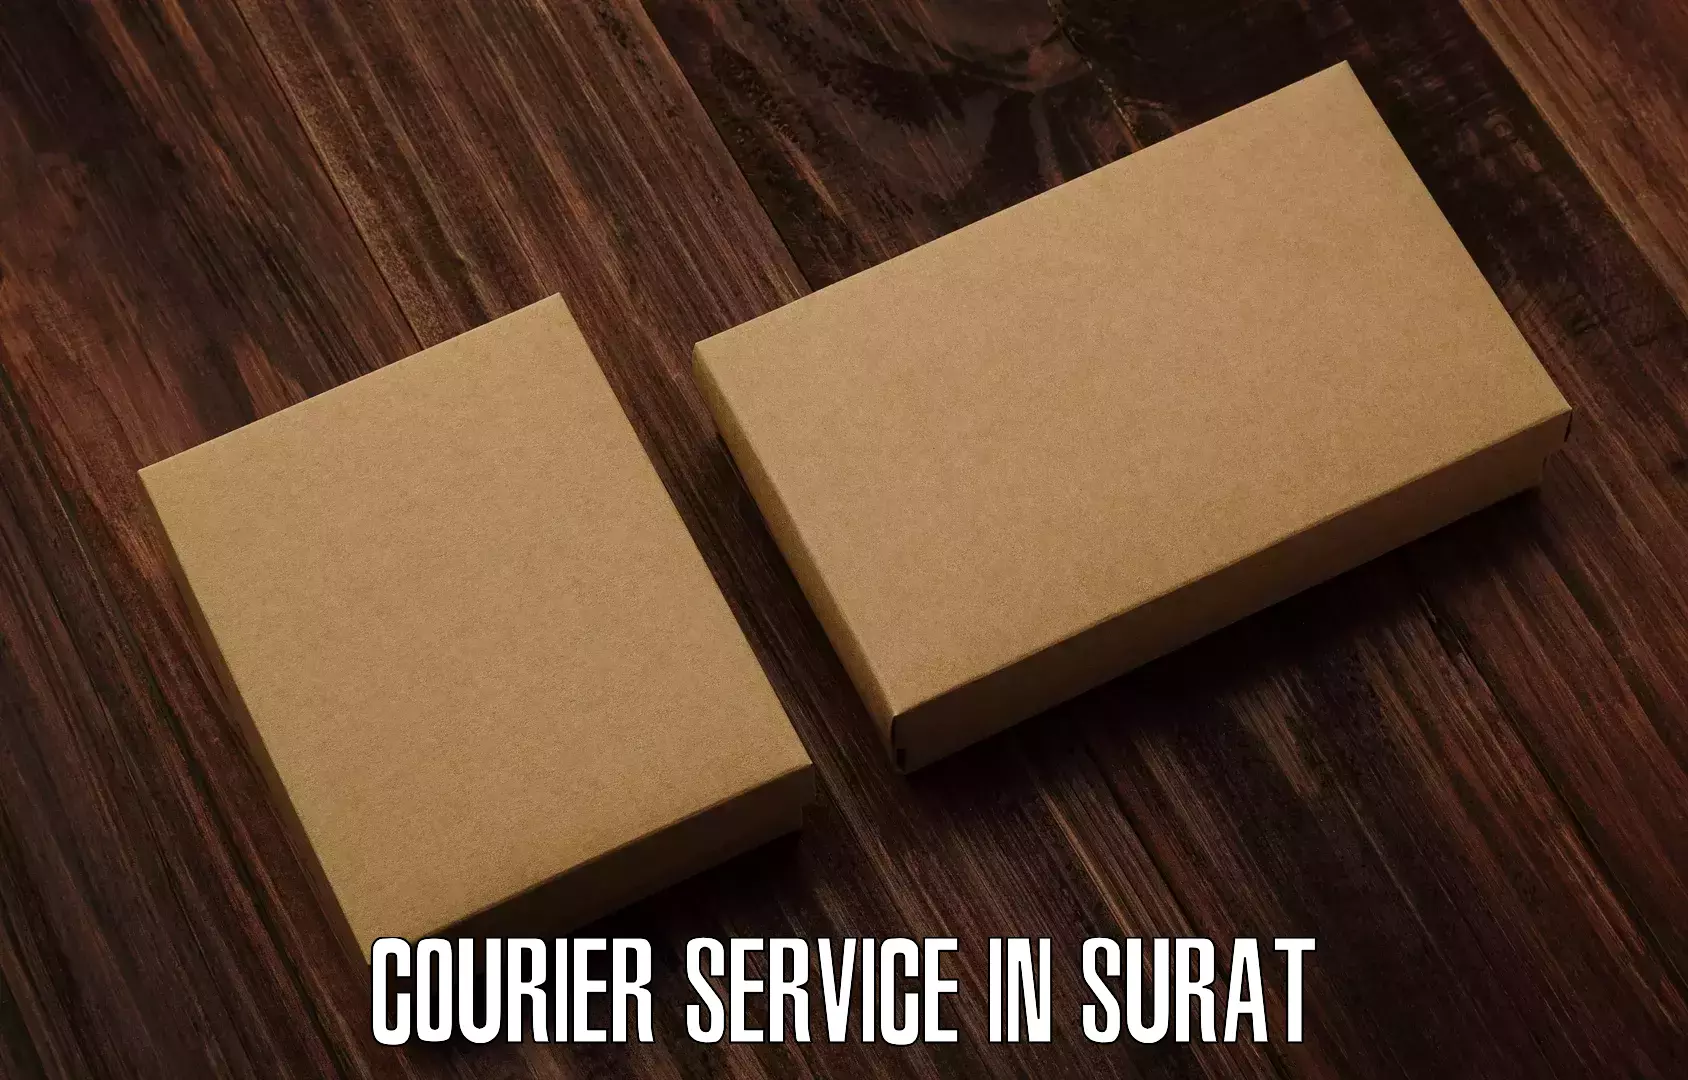 Fast shipping solutions in Surat